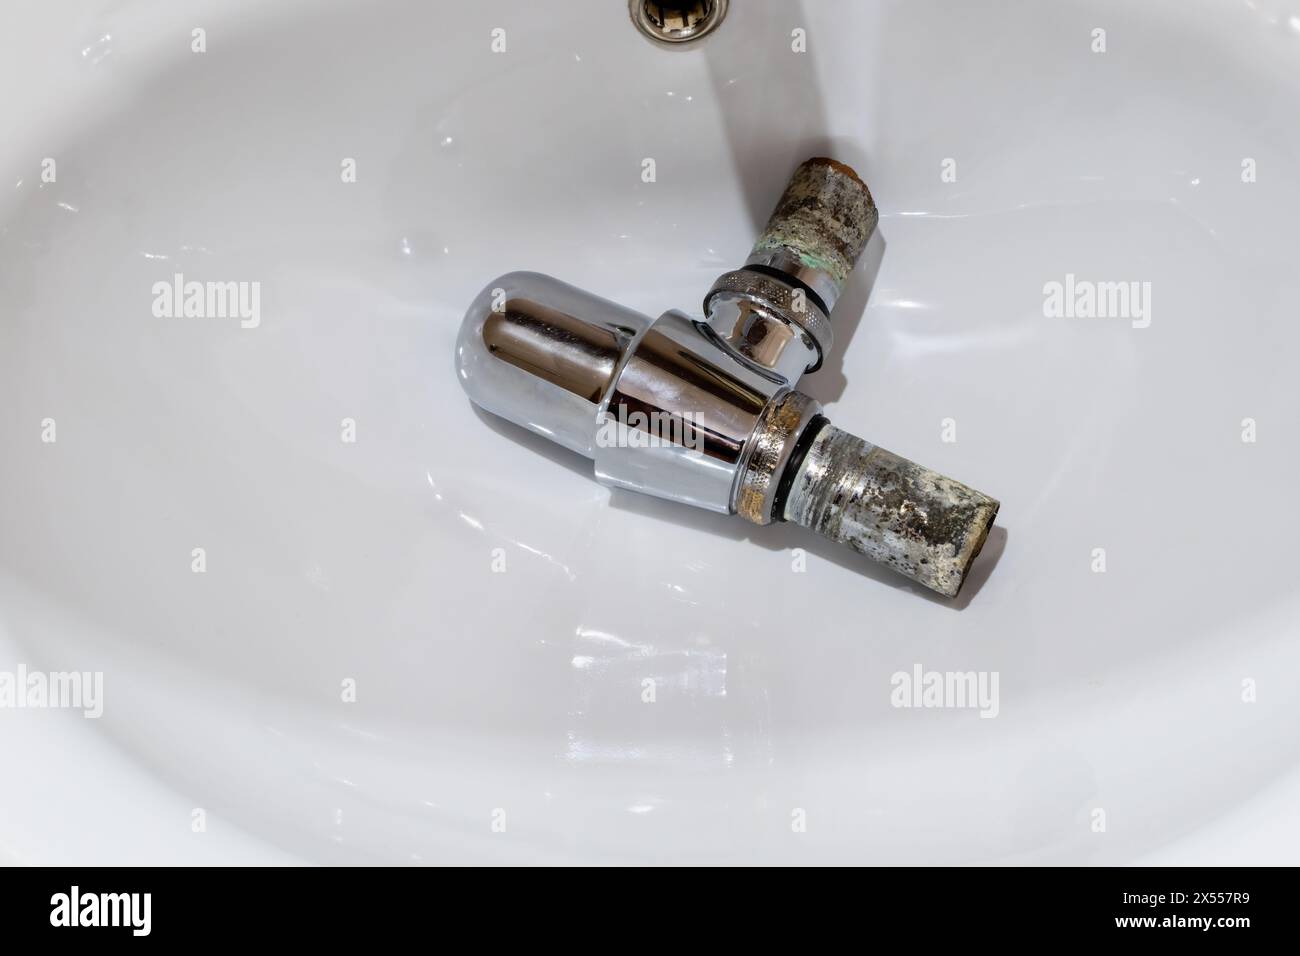 Metal drain siphon with rusted pipes covered with corrosion on background of white ceramic sink Stock Photo